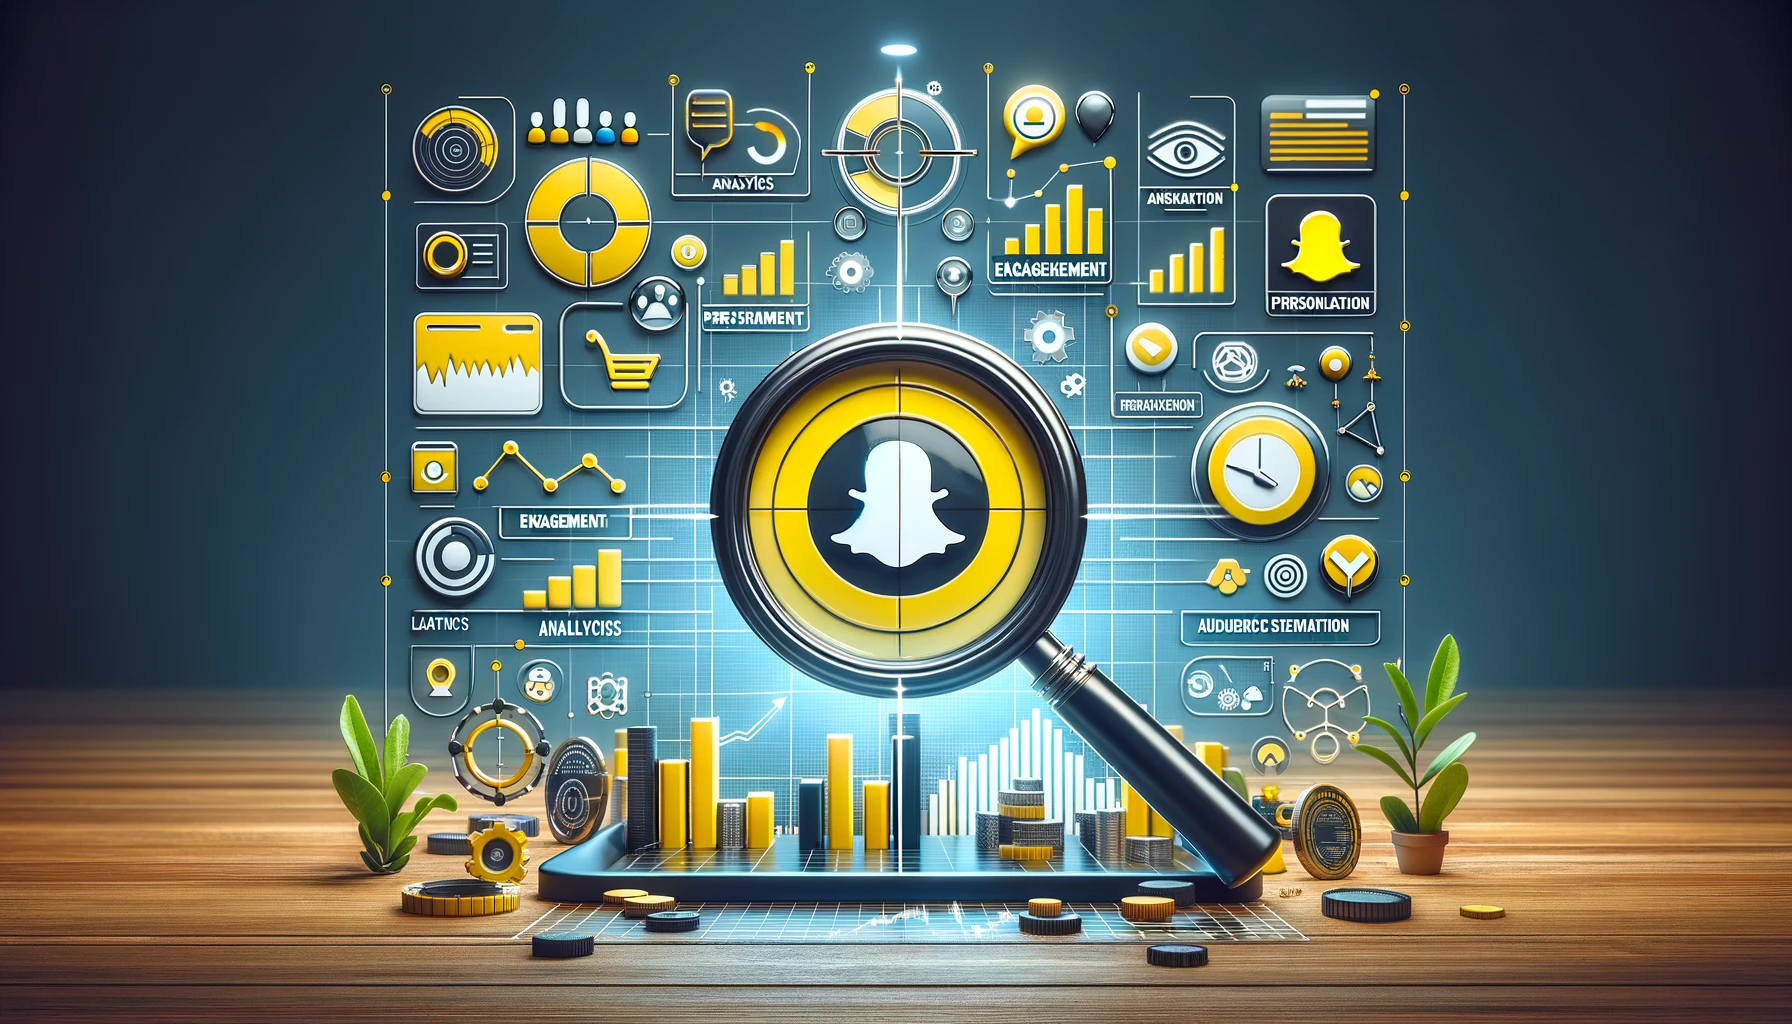 Illustration of precise Snapchat ad targeting showing a magnifying glass focusing on a target demographic within a Snapchat interface.